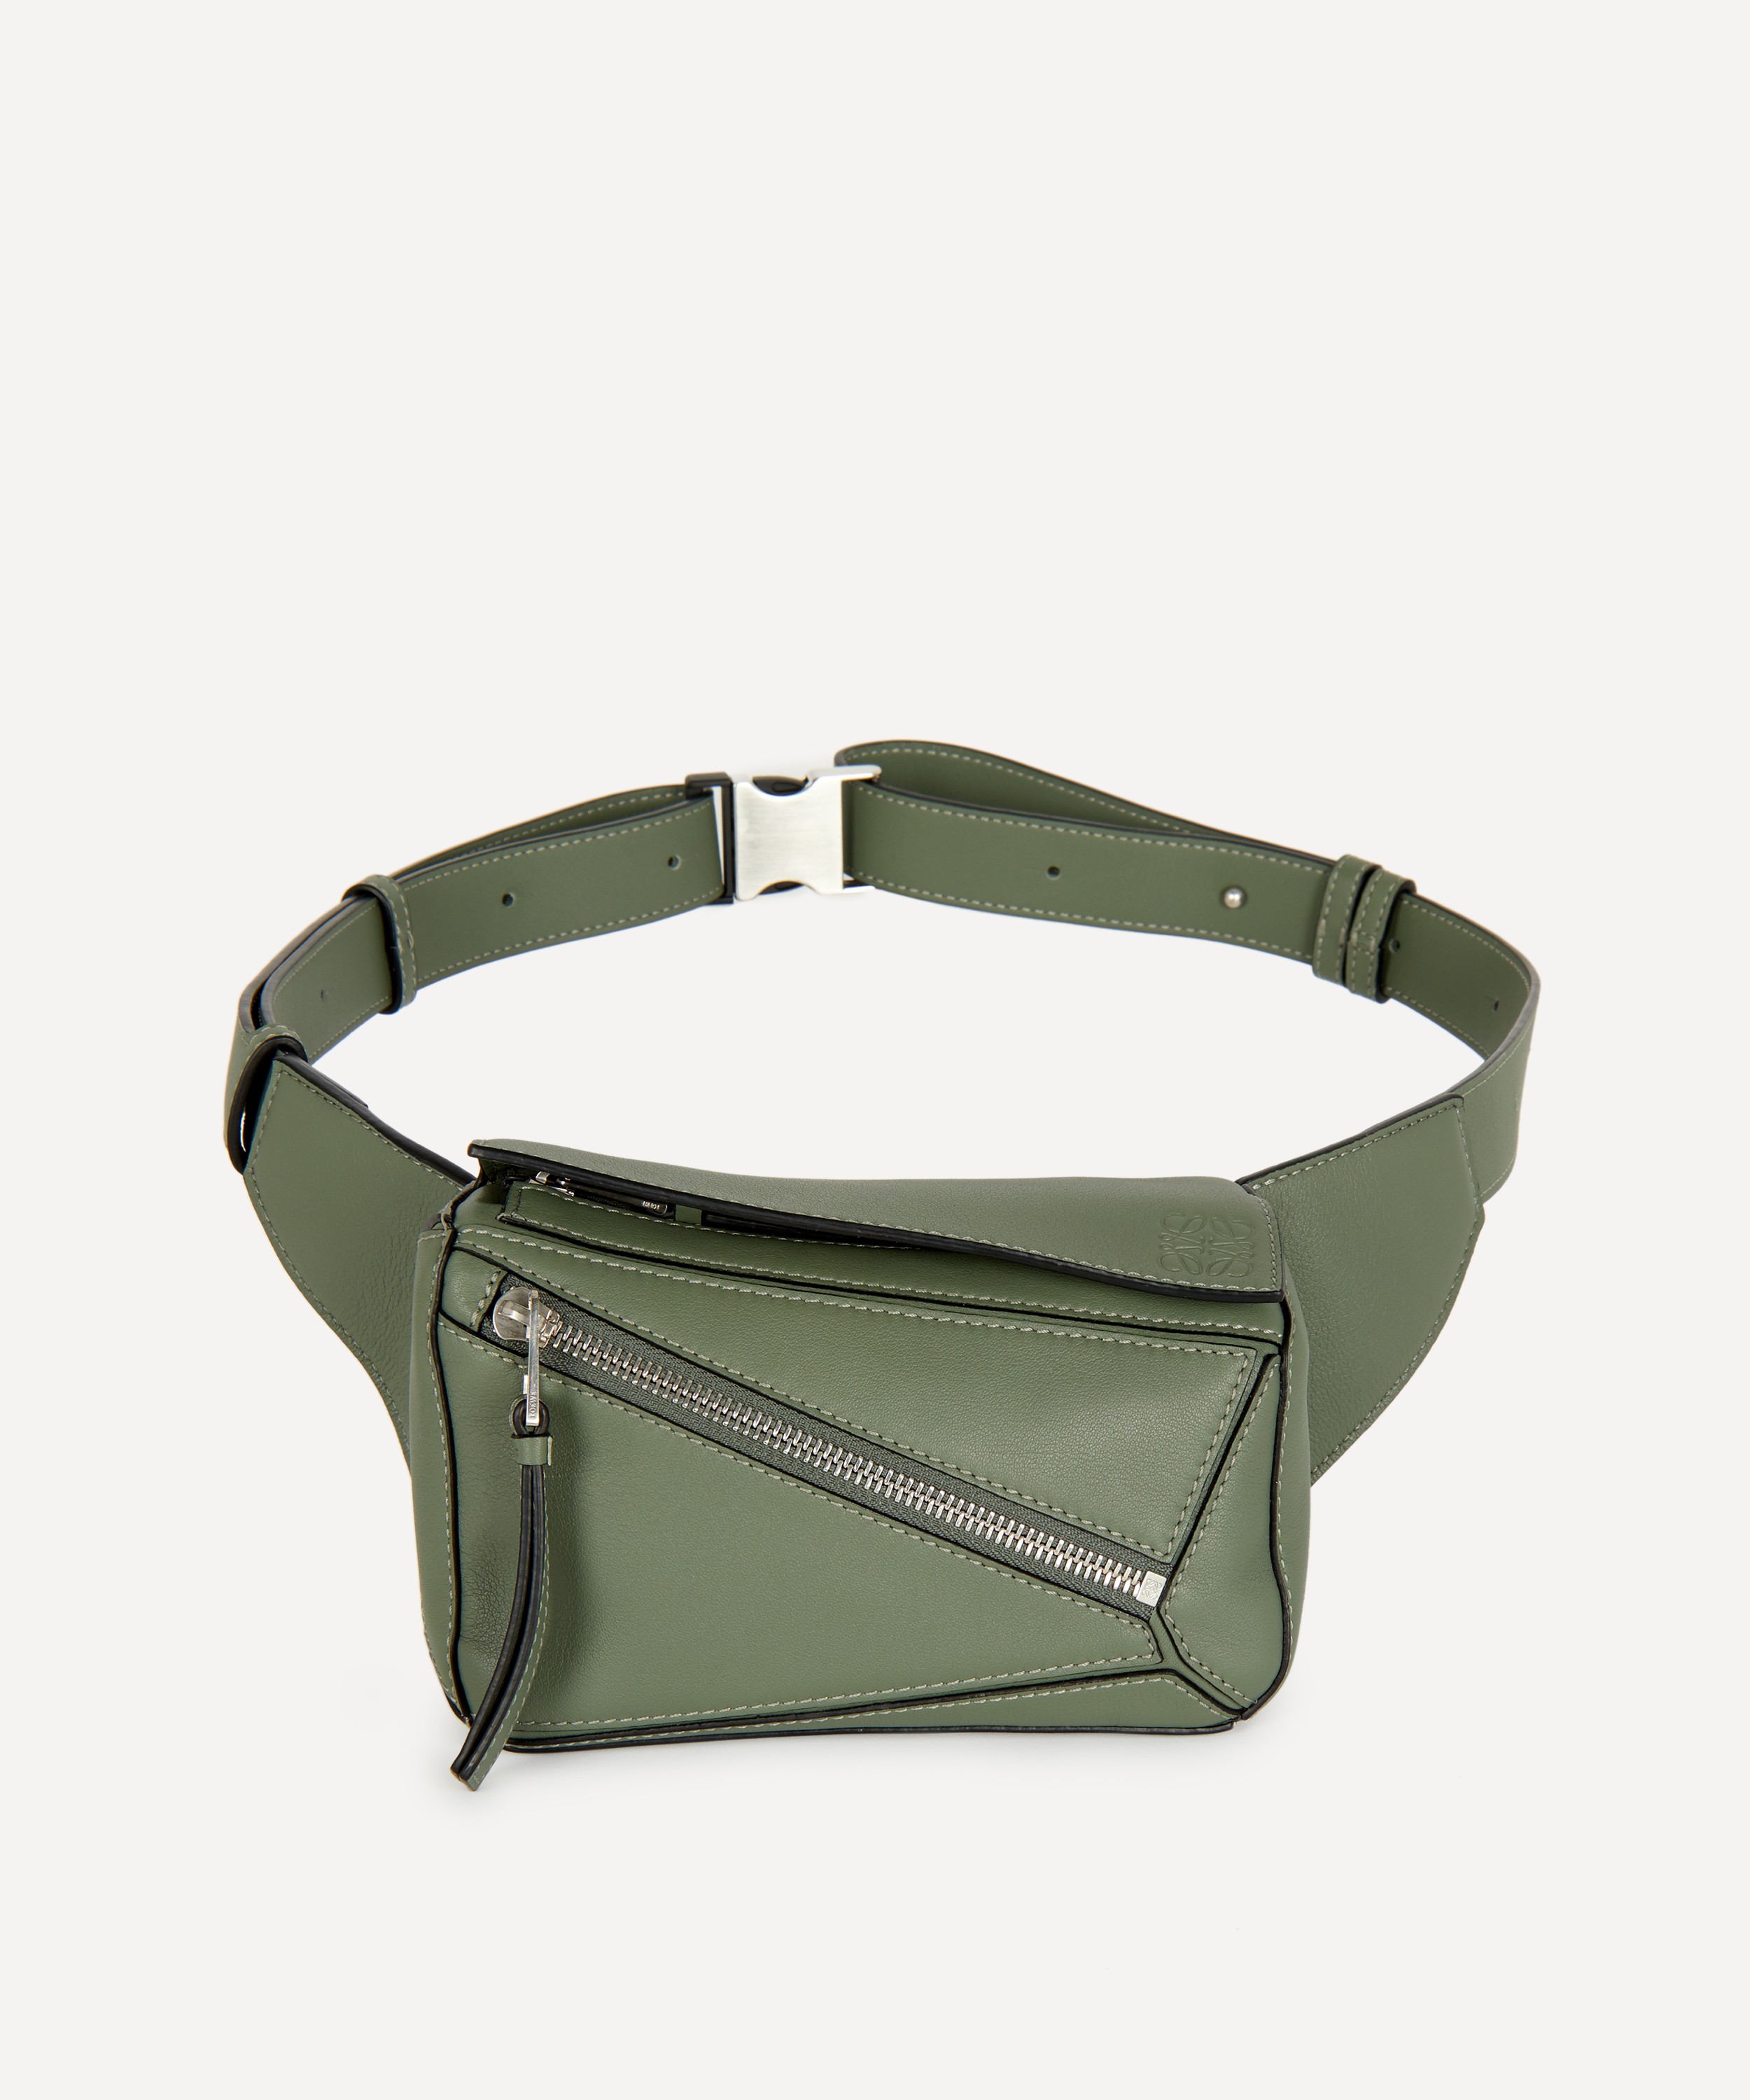 Loewe Puzzle Small Leather Belt Bag